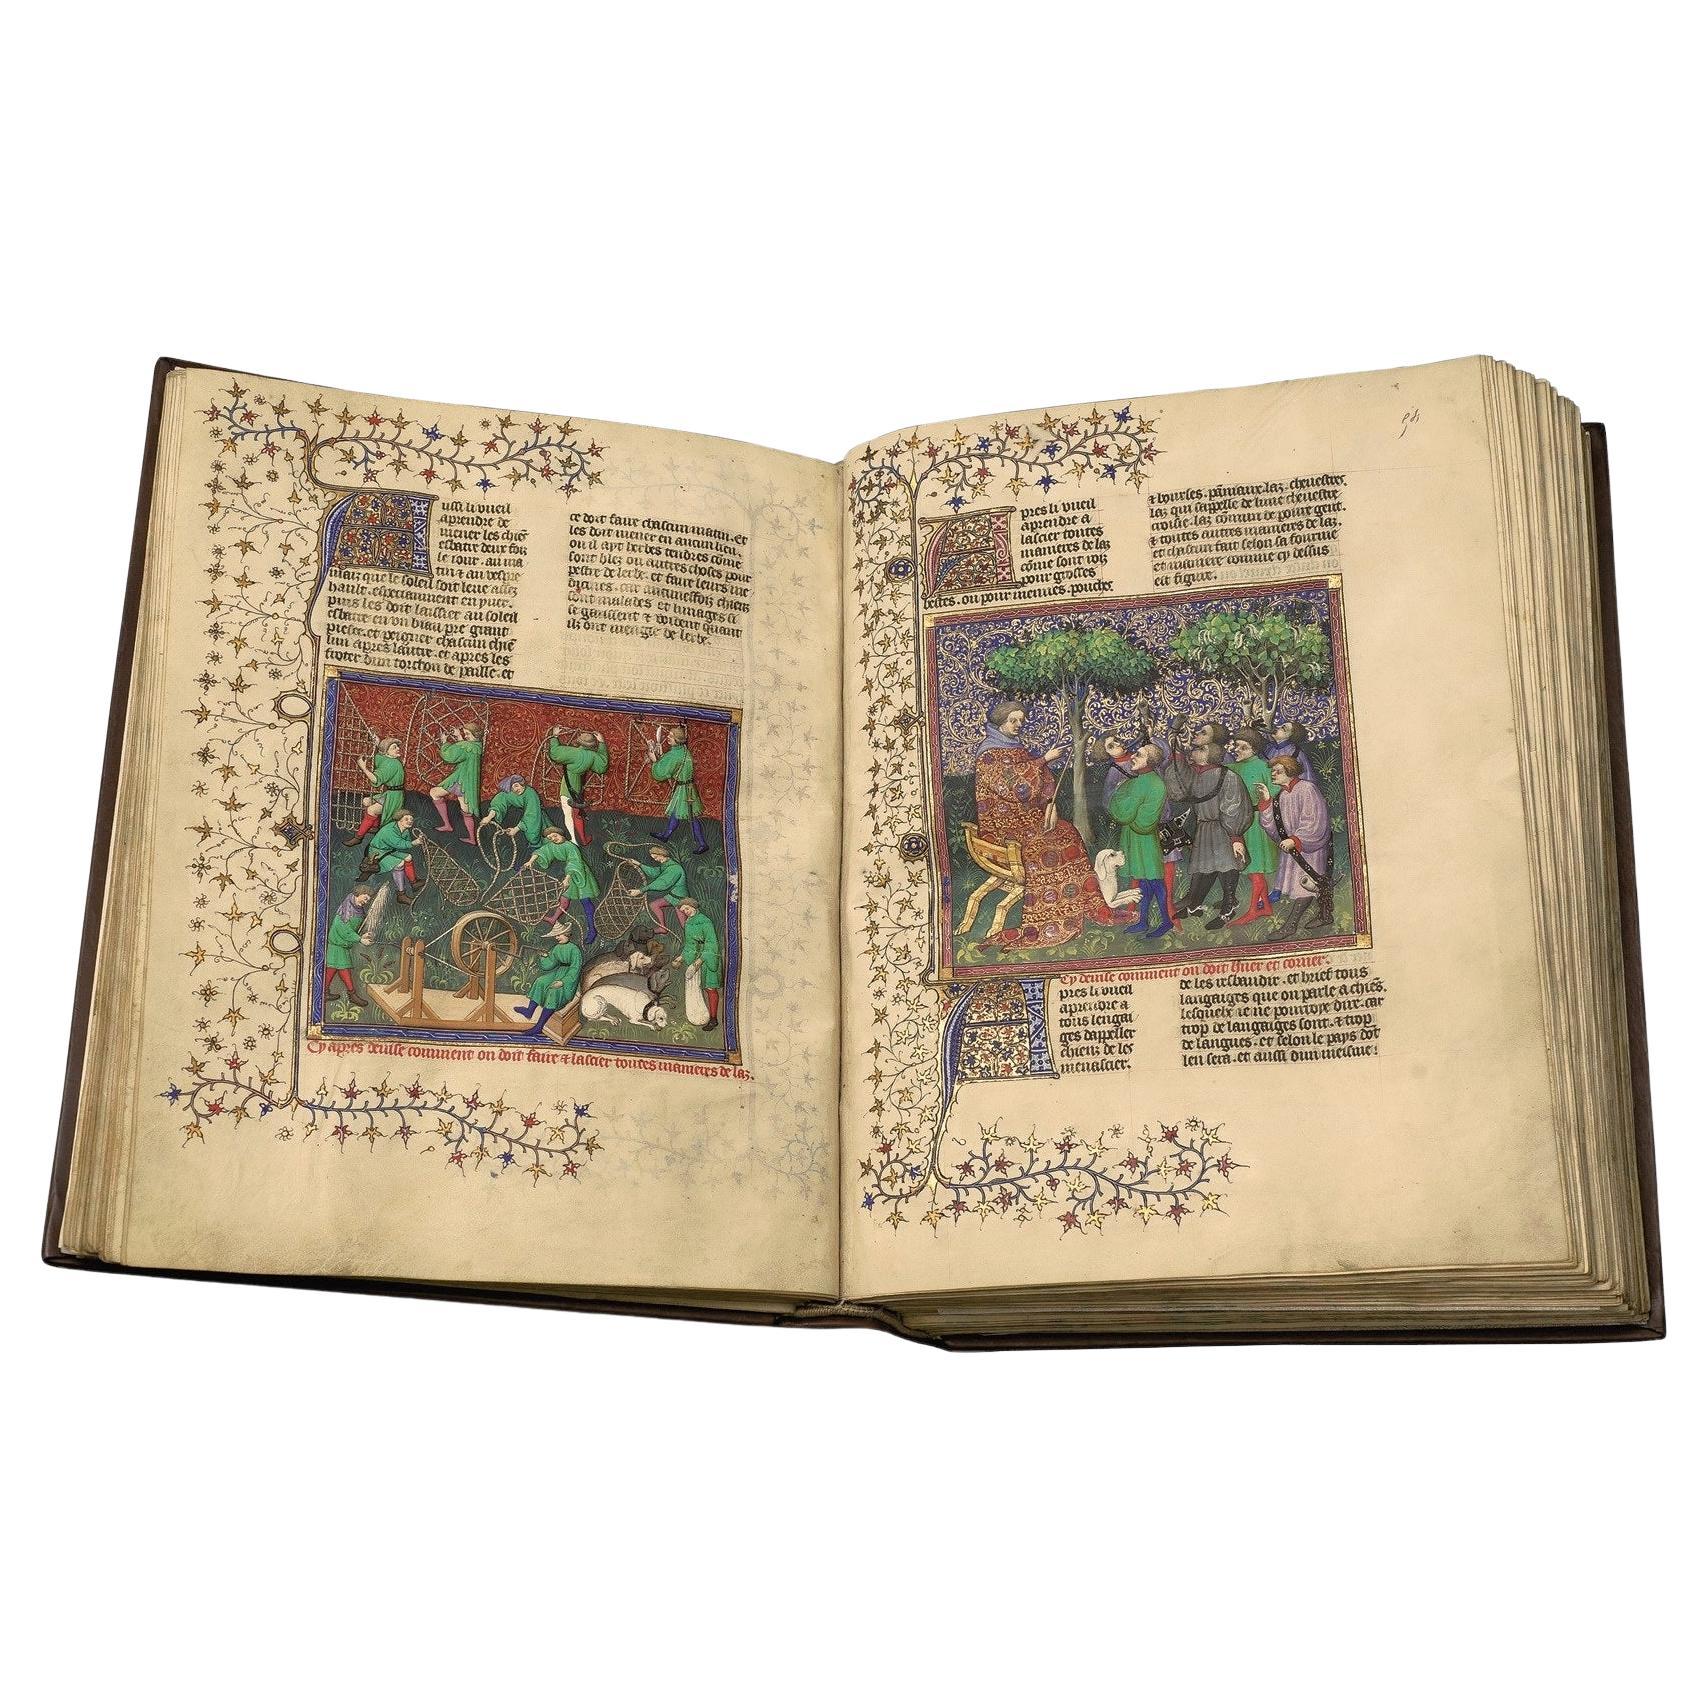 This is a one-time only facsimile edition limited to 987 copies of a Medieval illuminated manuscript, the Book of the Hunt, by the French nobleman Gaston Fébus, owned by the Bibliothèque nationale de France, made by combining the highest technology